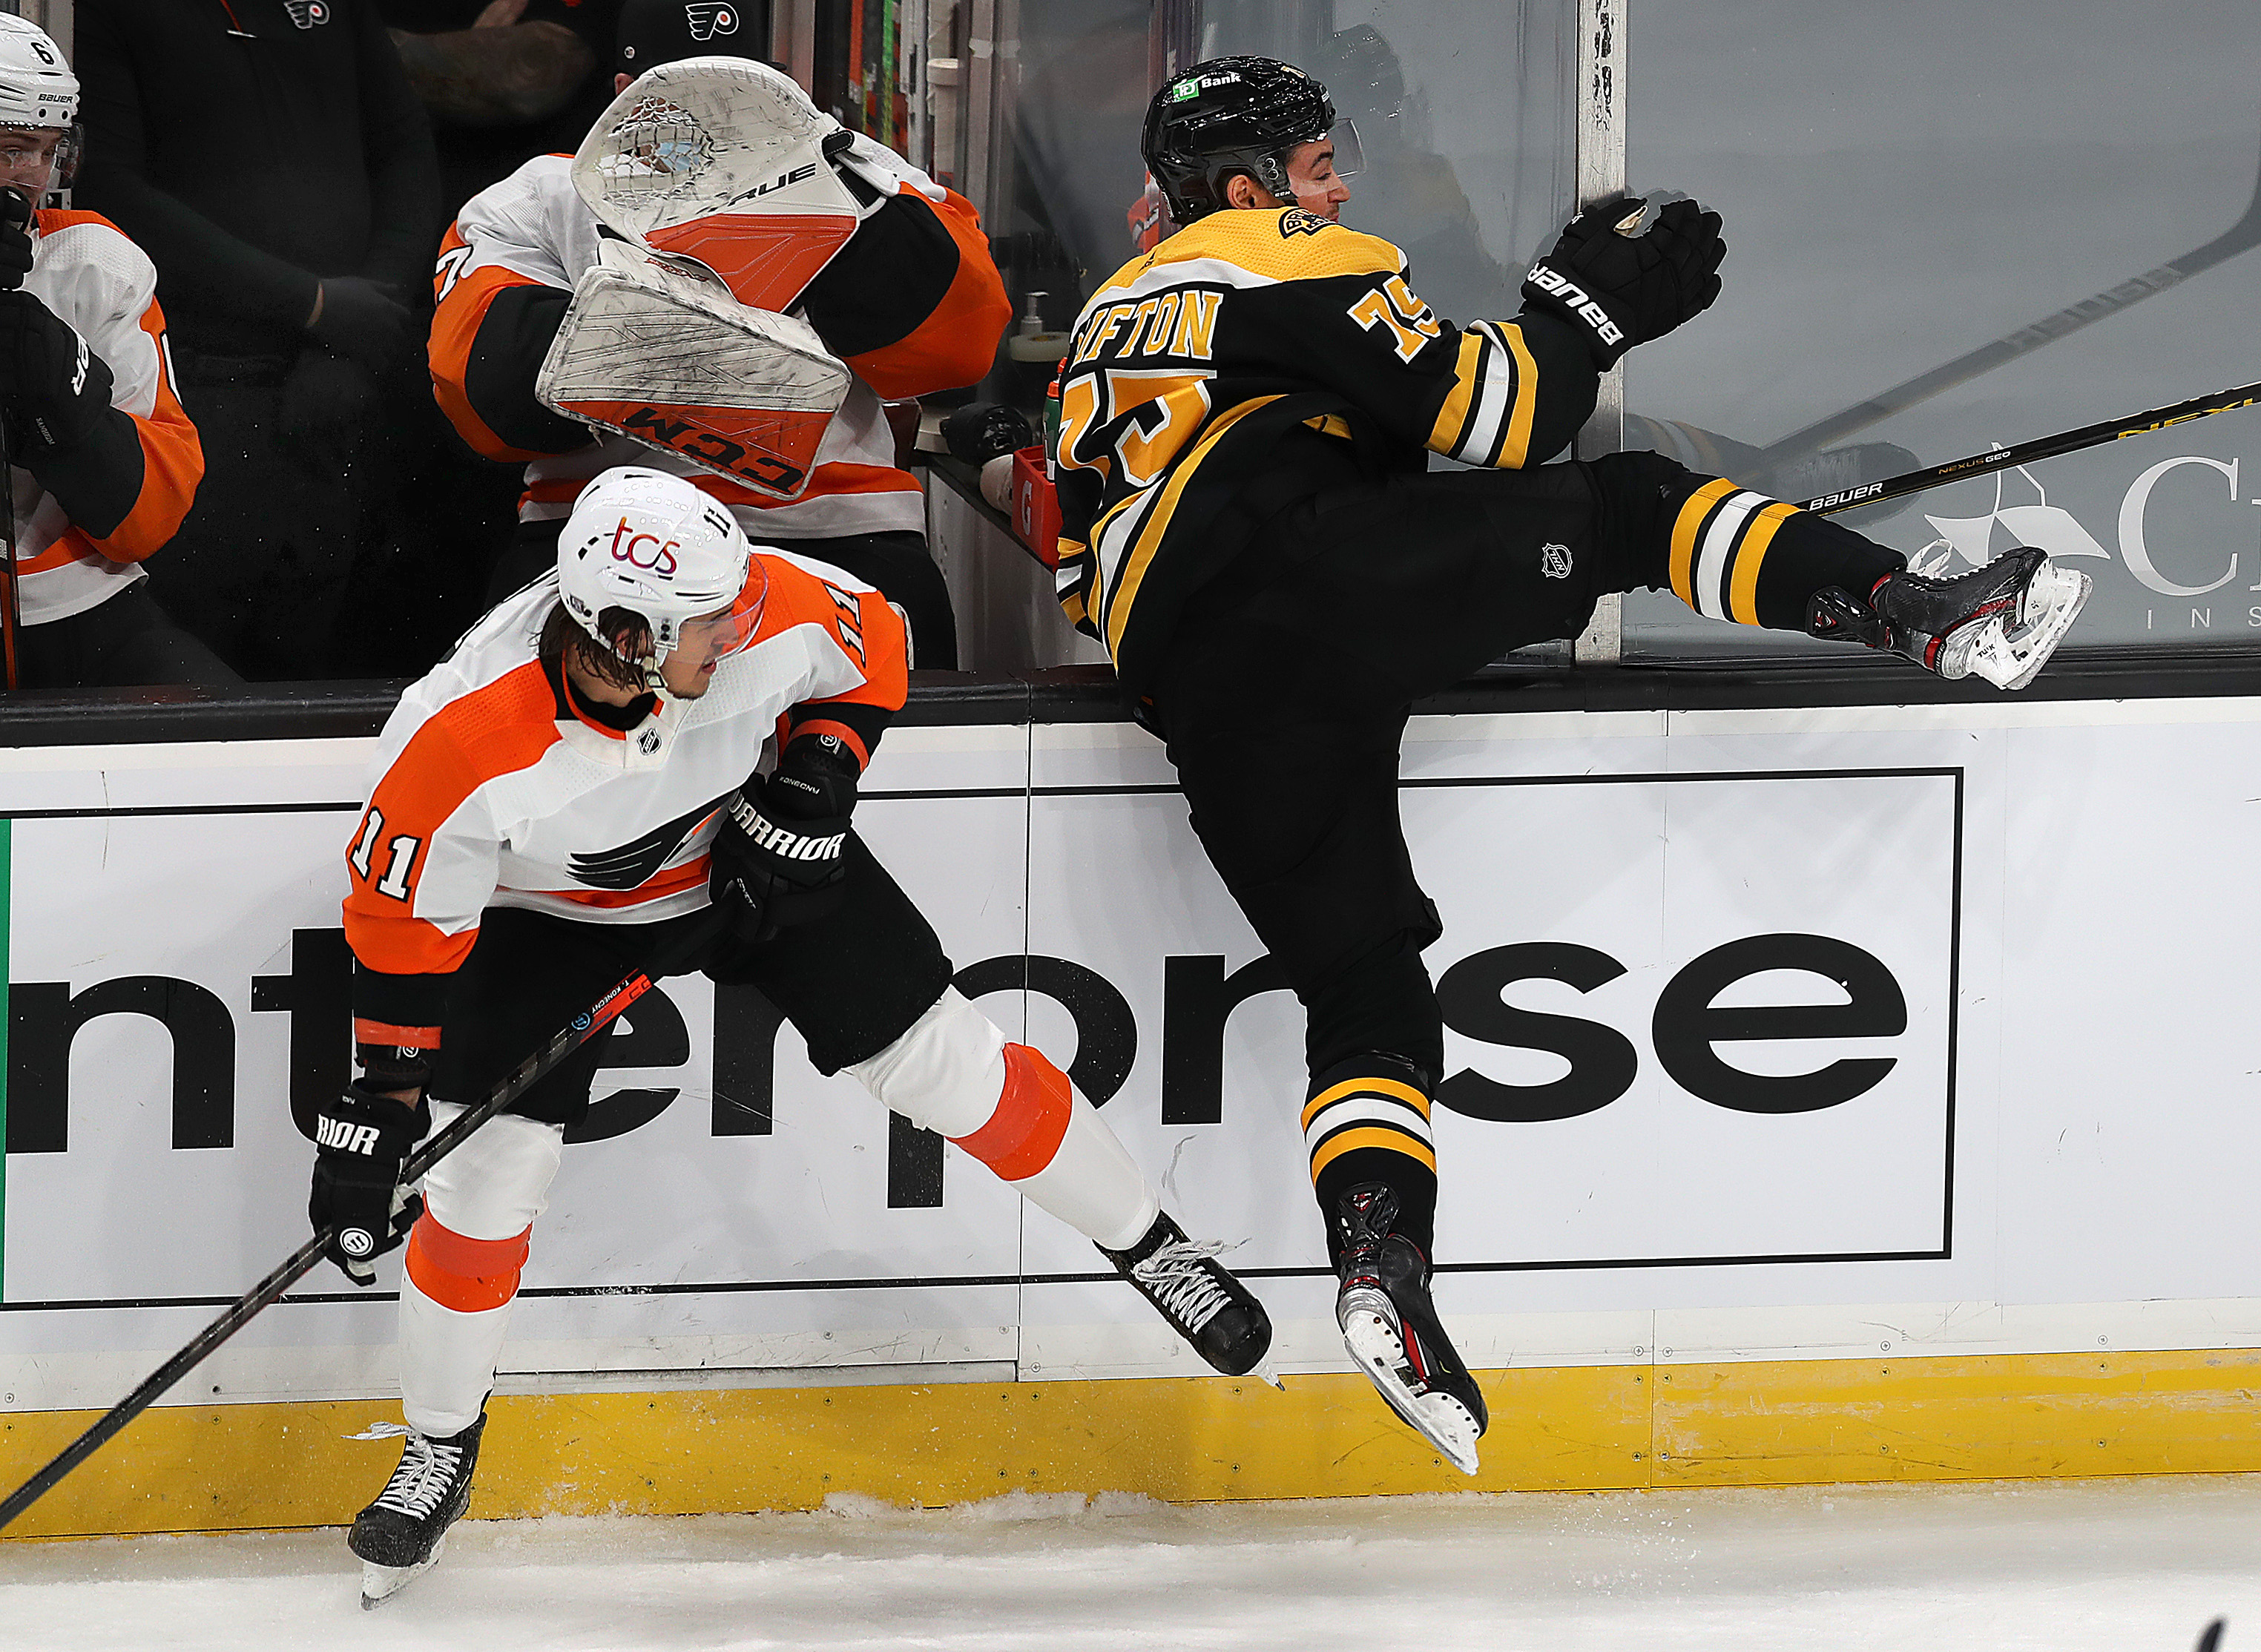 Bruins score 6 goals in rout of Flyers at TD Garden